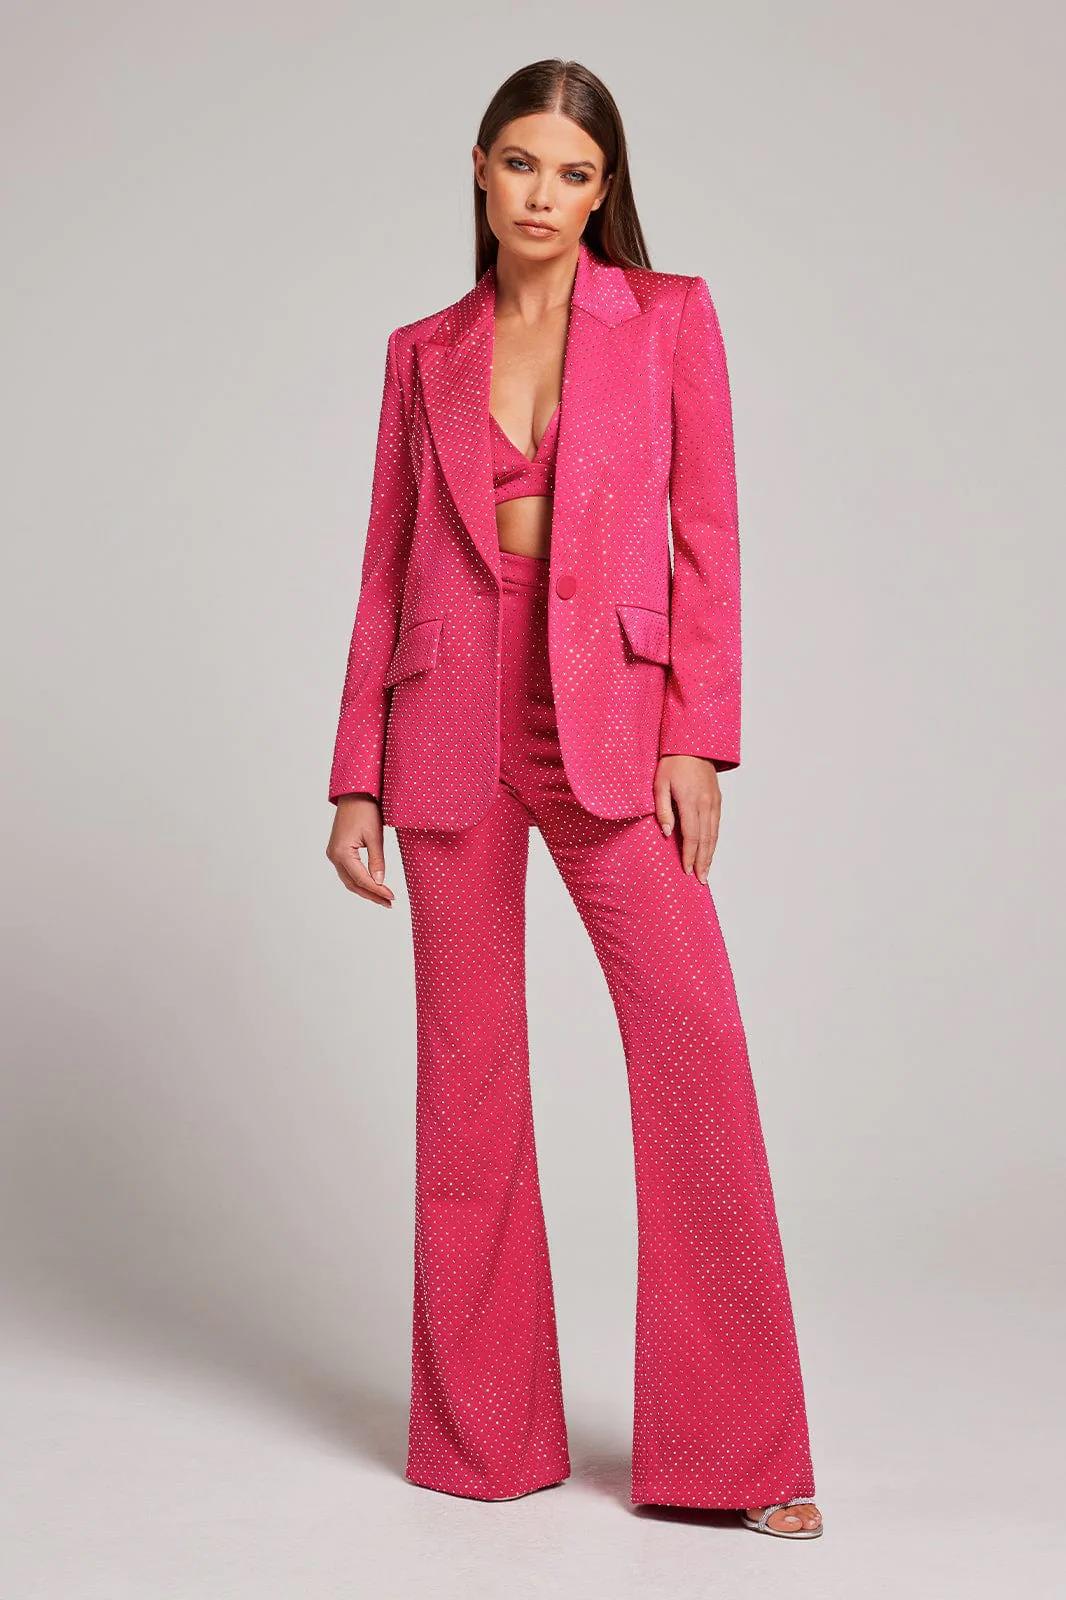 Suits: Heavy Industry Sexy Suit Three Piece Suit